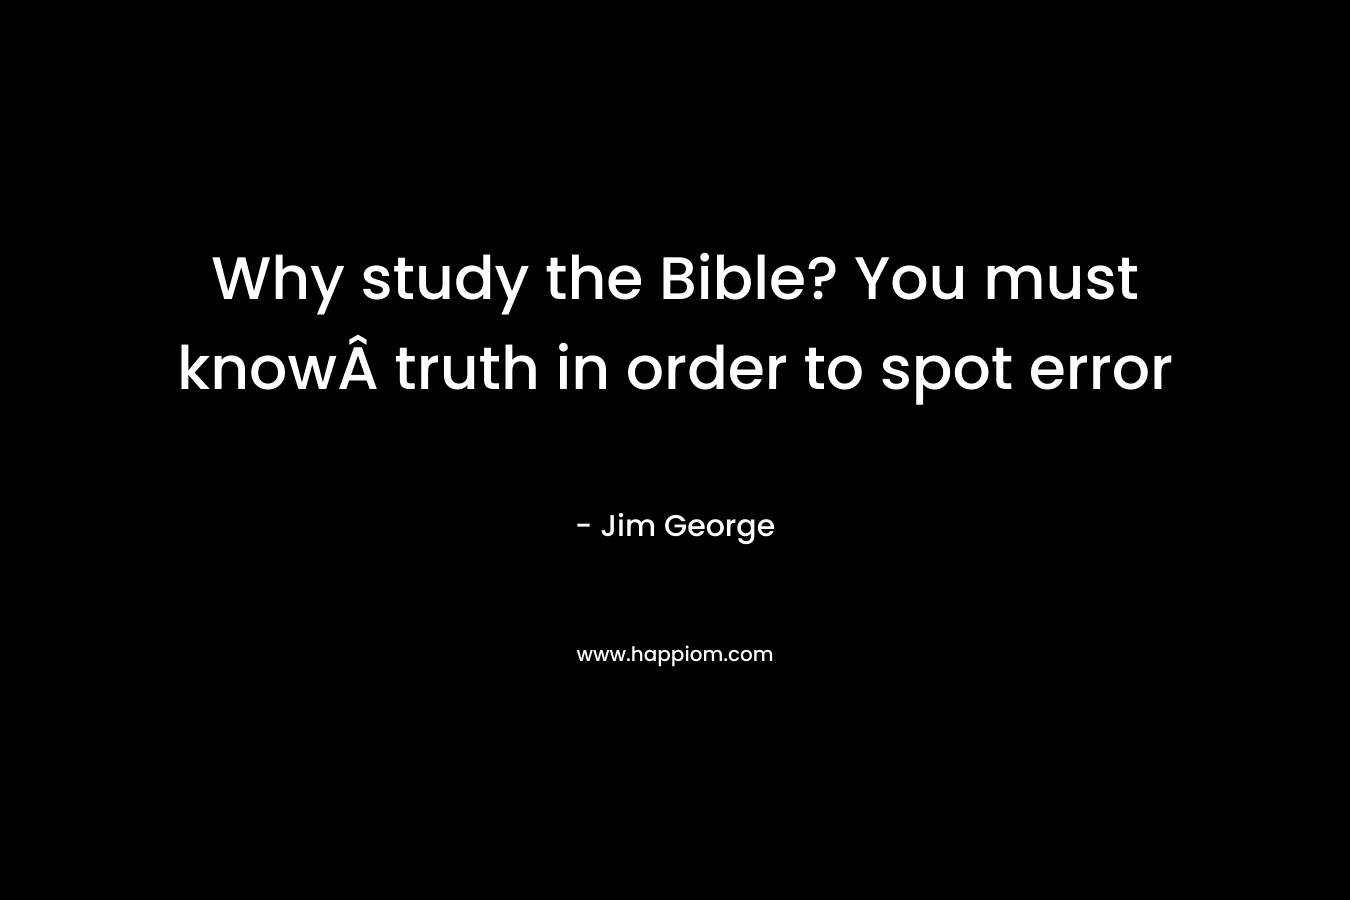 Why study the Bible? You must knowÂ truth in order to spot error